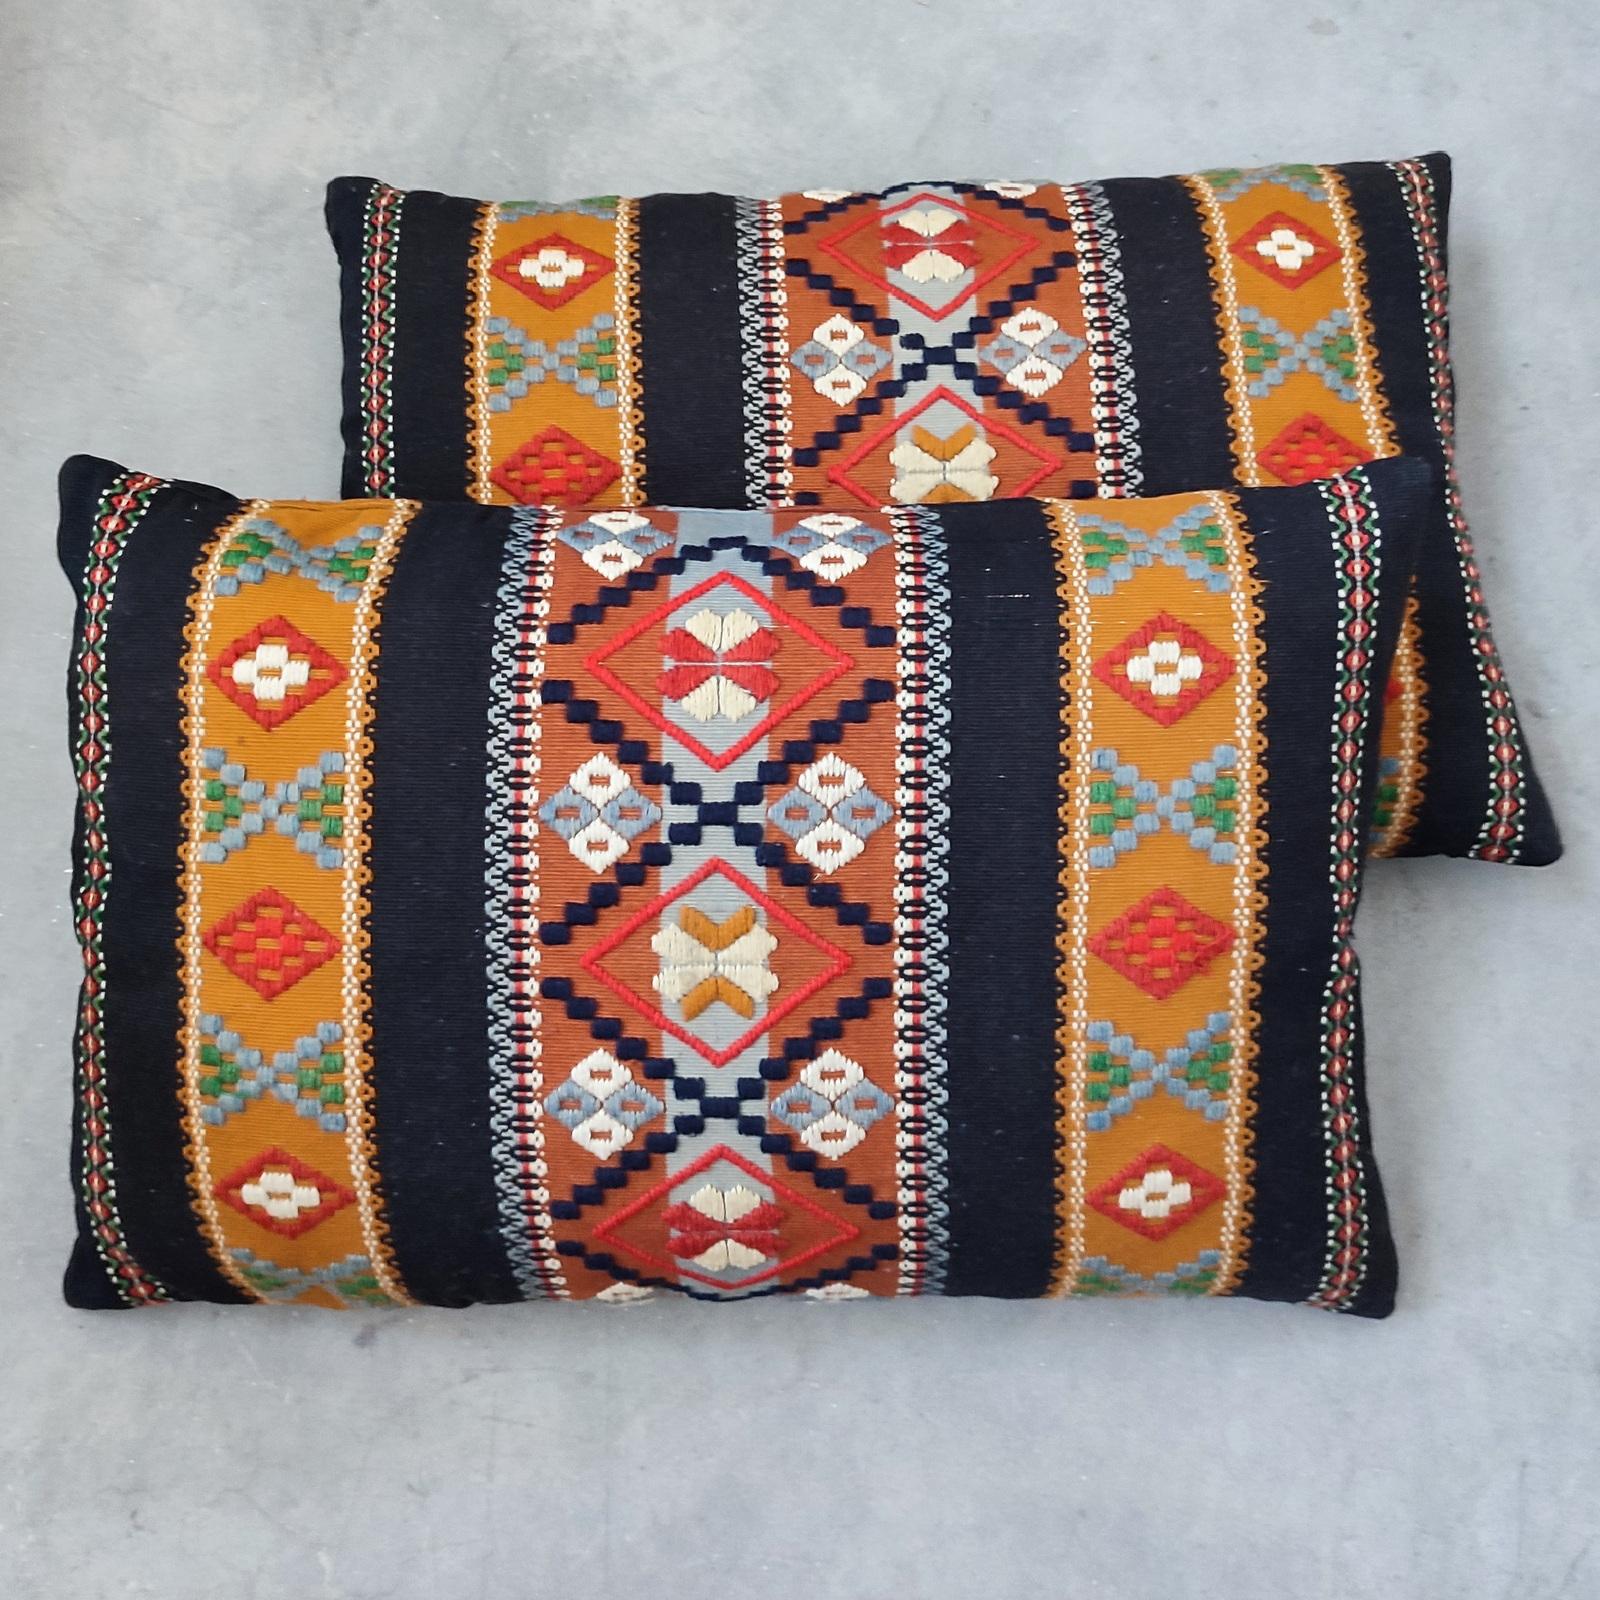 Flatweave Pair of Large Pillows, Sweden, Early 20th Century For Sale 2